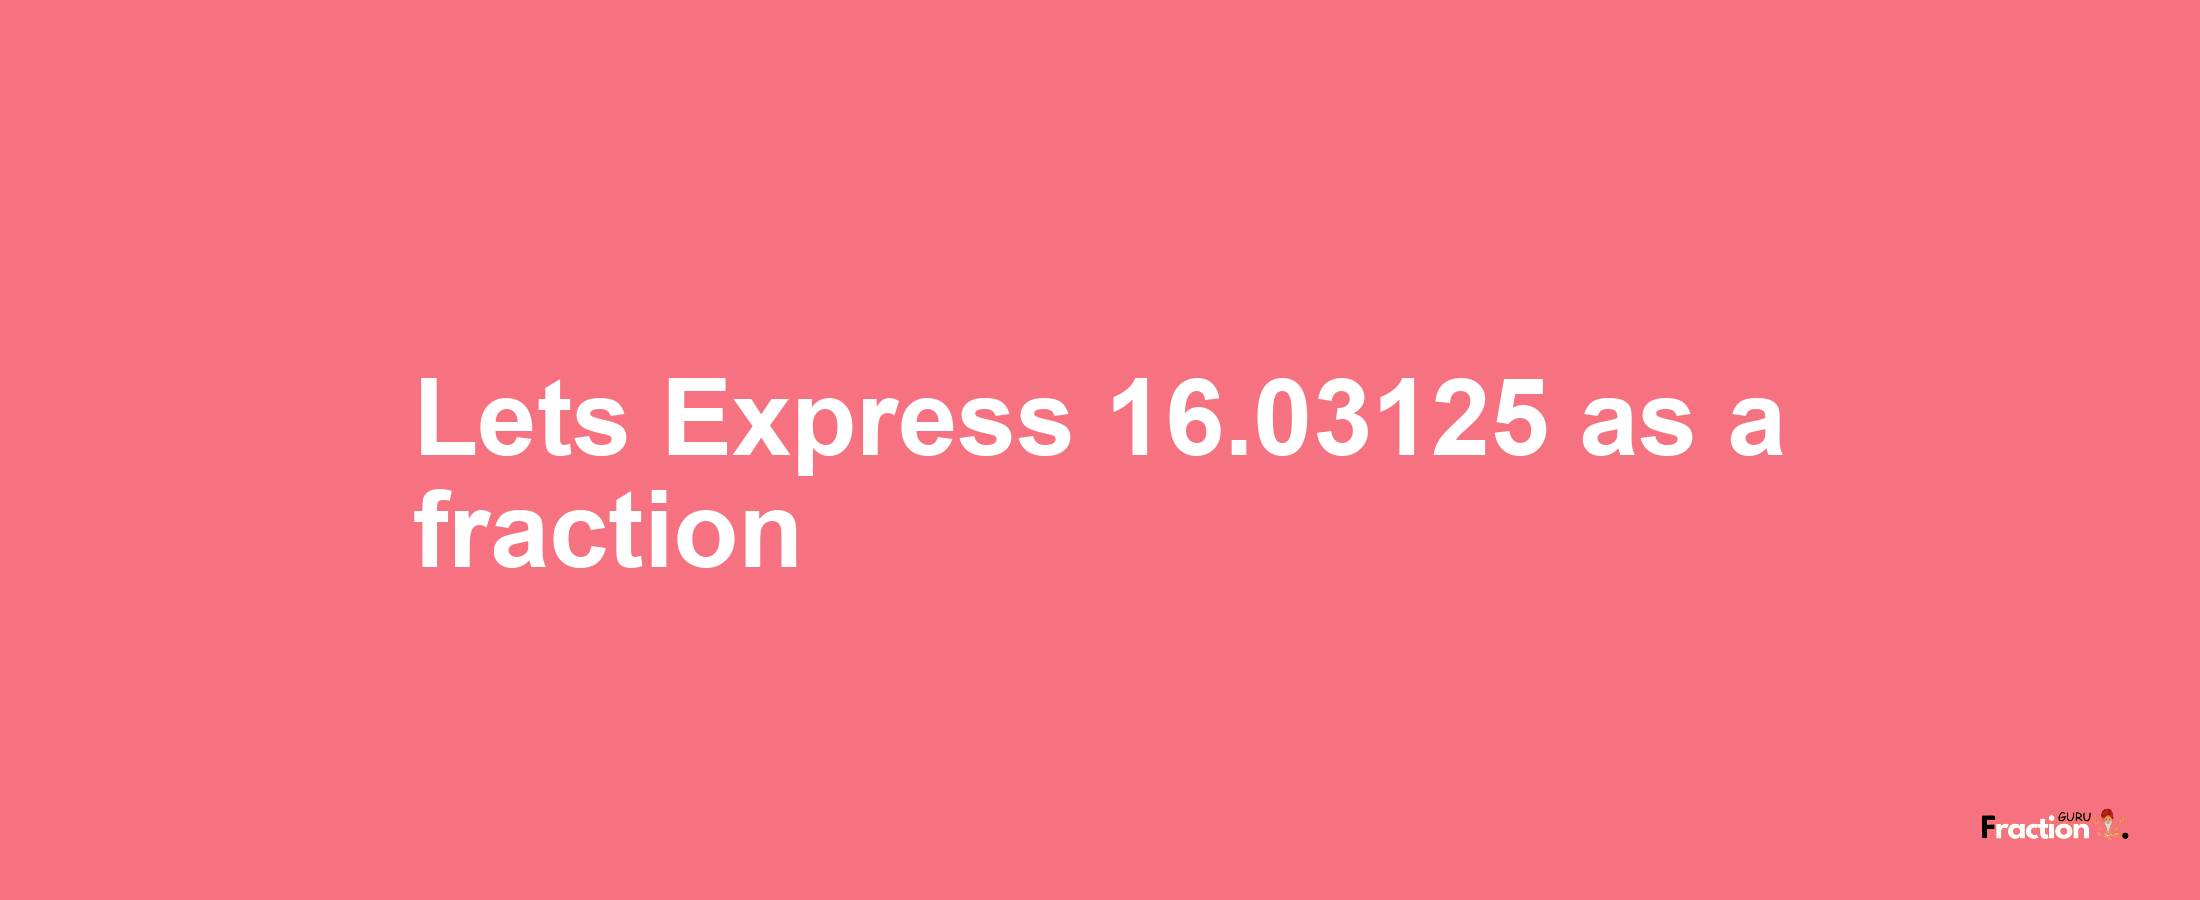 Lets Express 16.03125 as afraction